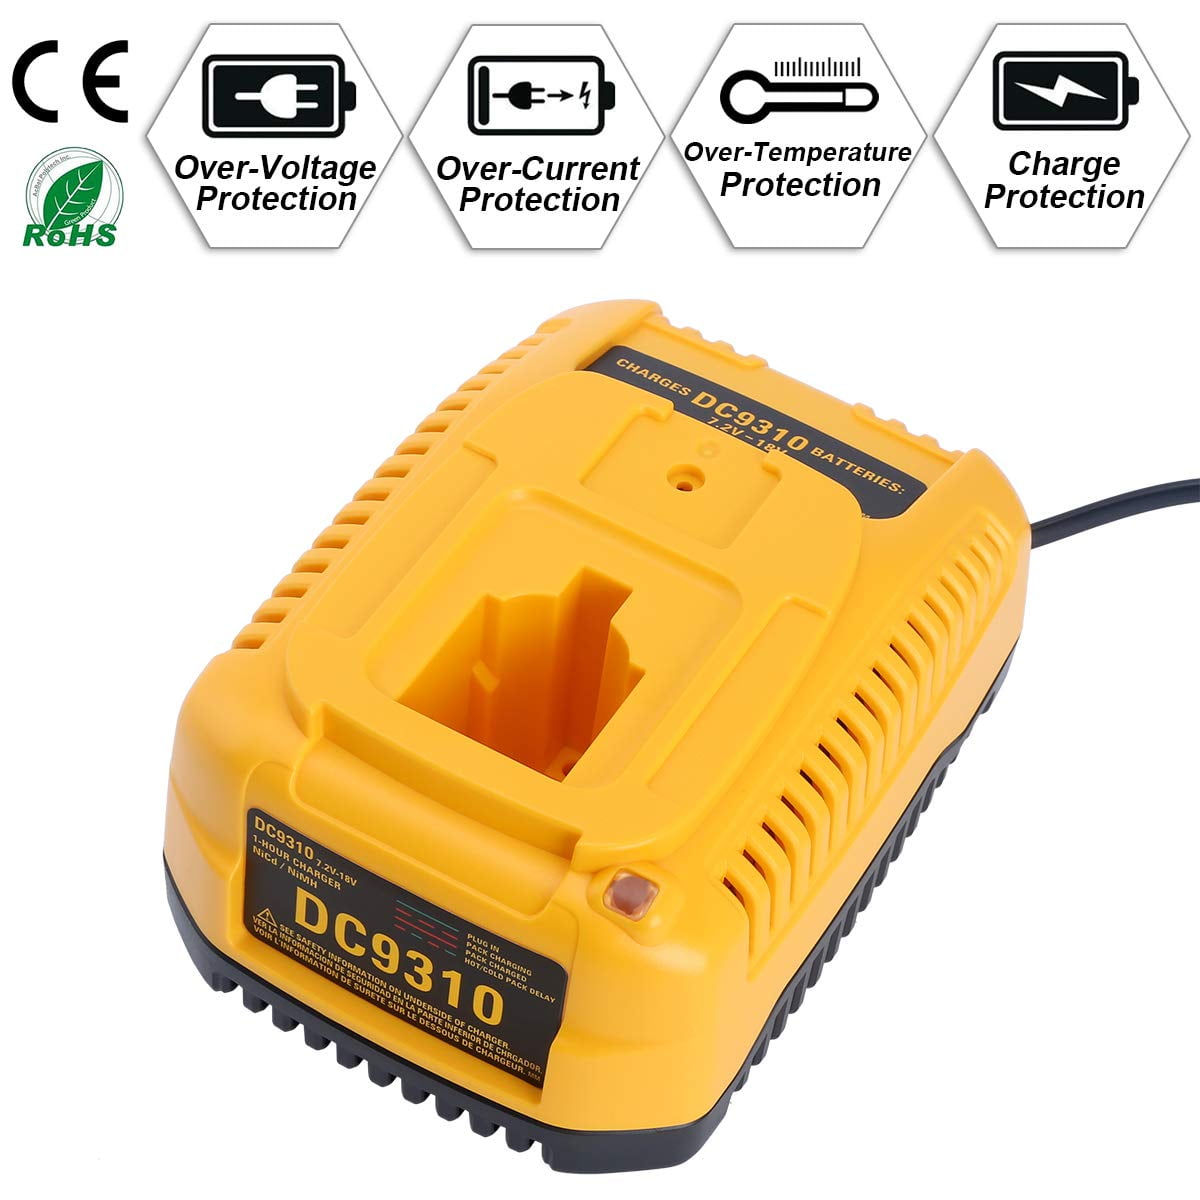 Details about   DC9096-2 XRP BATTERY OR CHARGER FOR DEWALT 18 VOLT NI-MH DC9098 DC9099 DC9310 